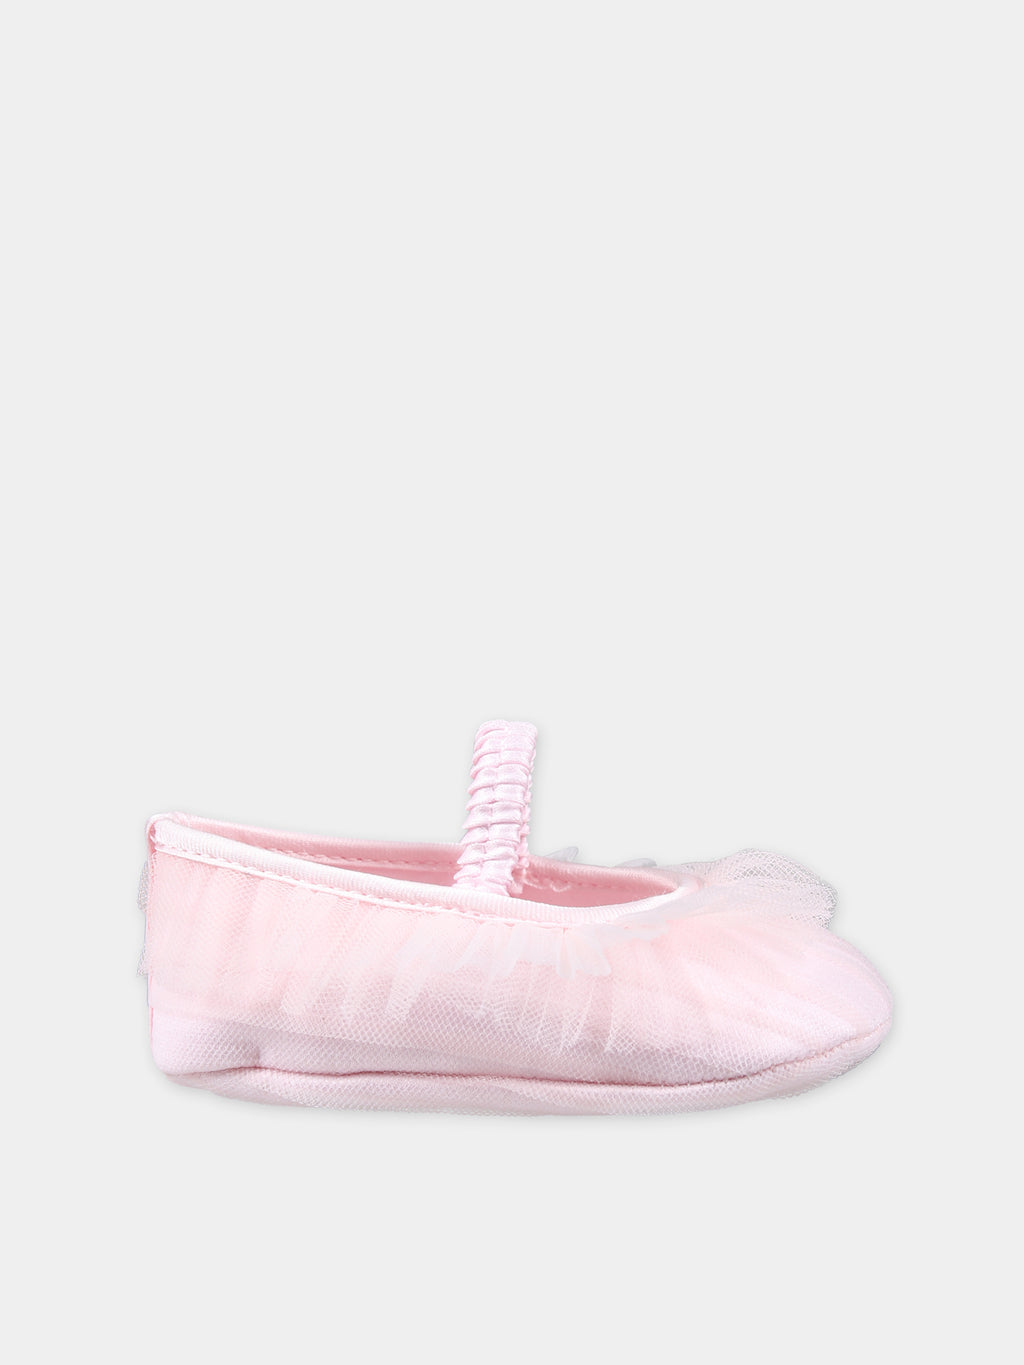 Pink ballet flats for baby girl with tulle